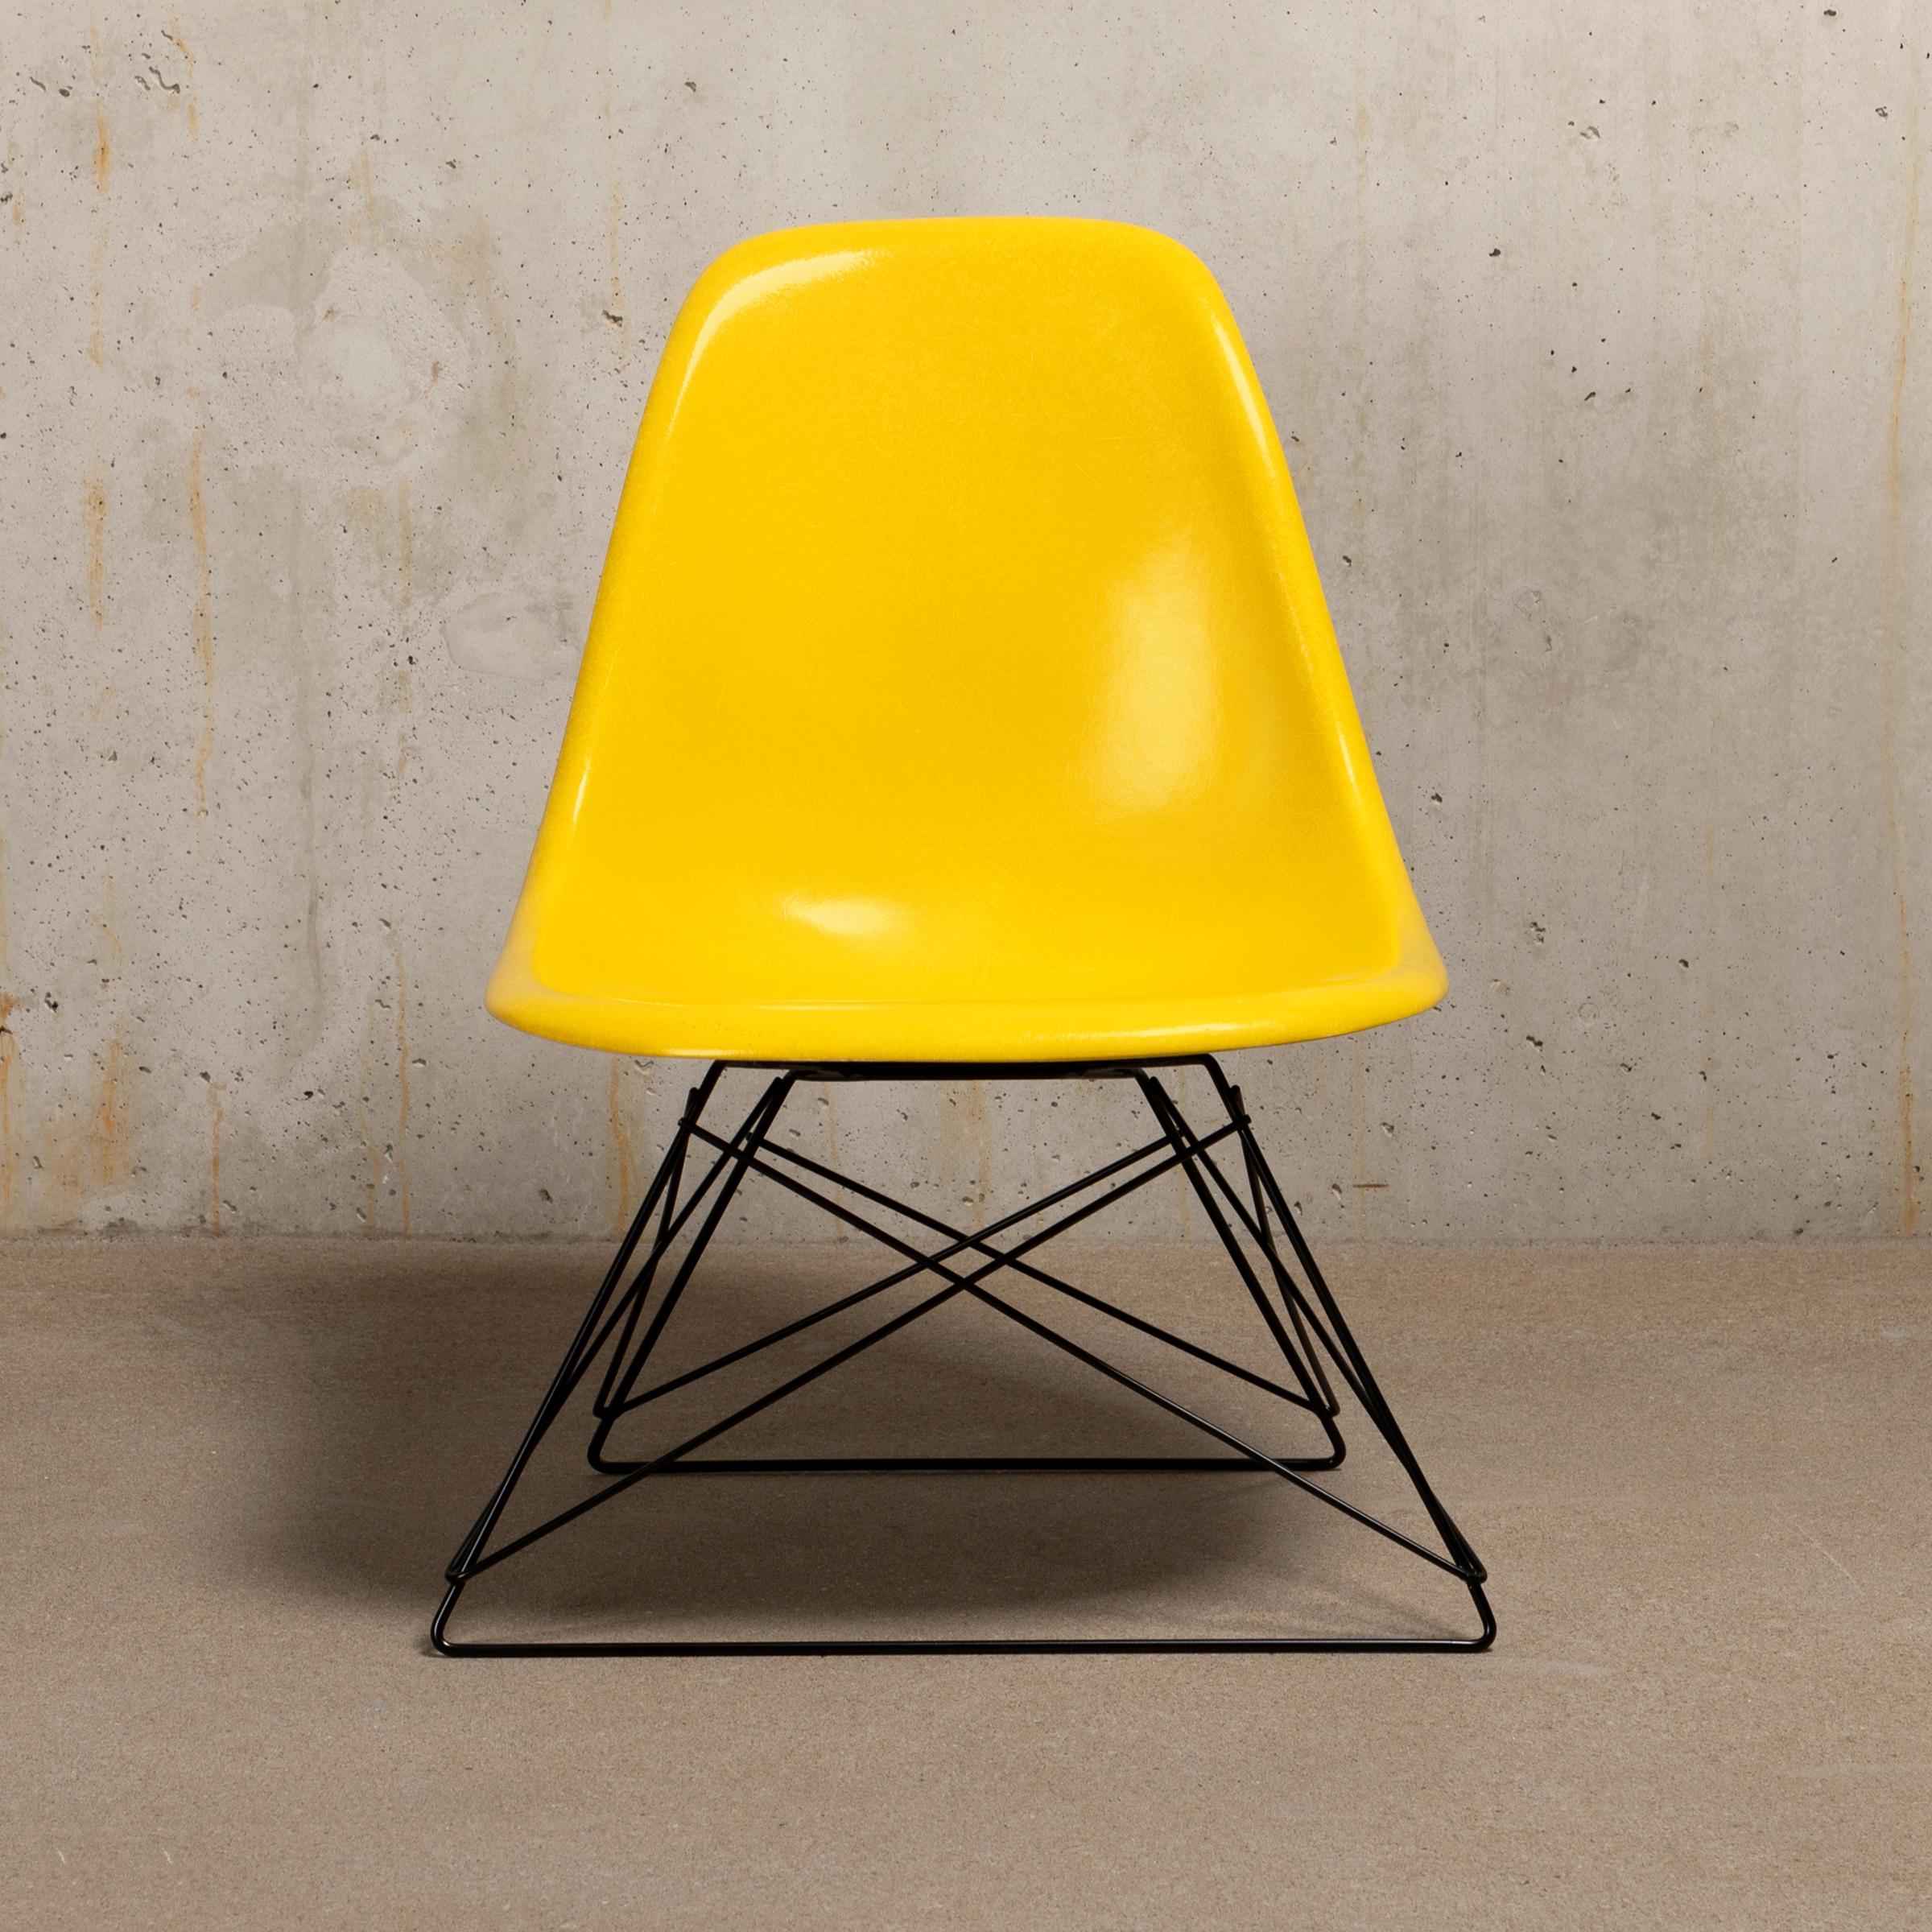 Iconic fiberglass LSR (Lounge Side chair Rod base) designed by Charles & Ray Eames for Herman Miller. The fiberglass shell is in very good condition with slight traces of use. Replaced shock mounts which guarantee save usability for the next